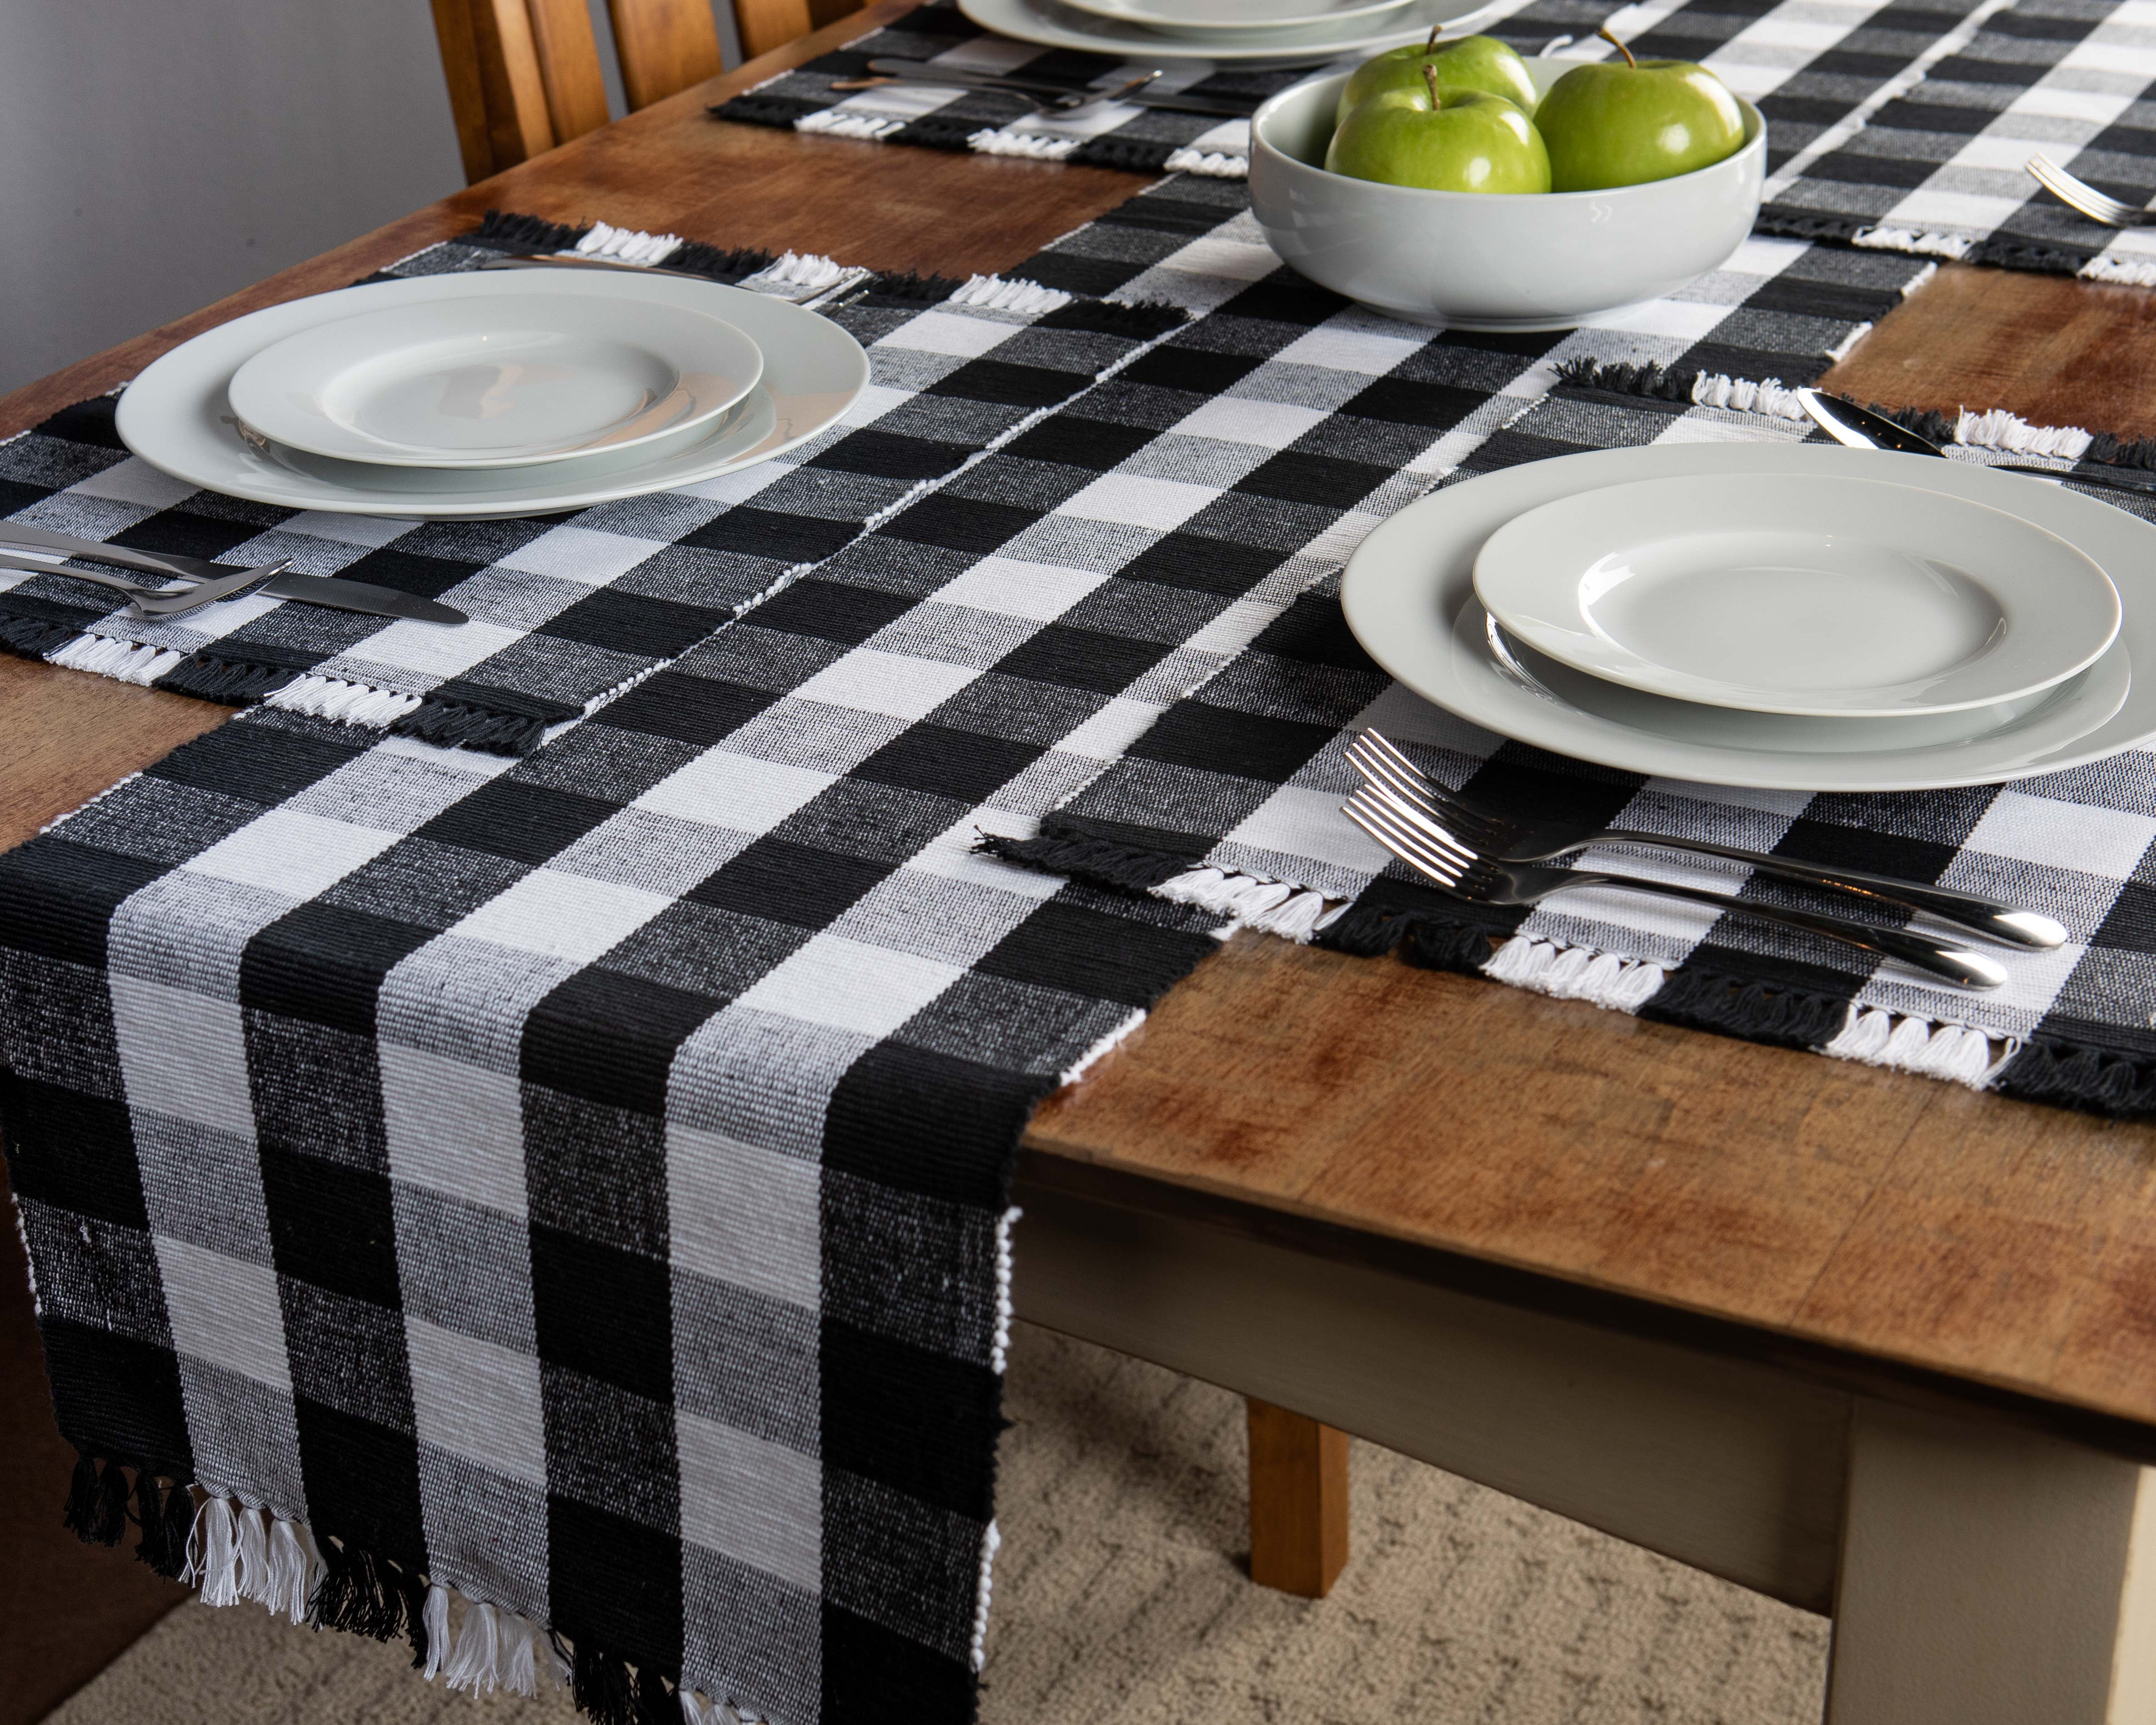 Fabstyles Buffalo Check 100% Cotton Table Runner, 13 inch x 72 inch